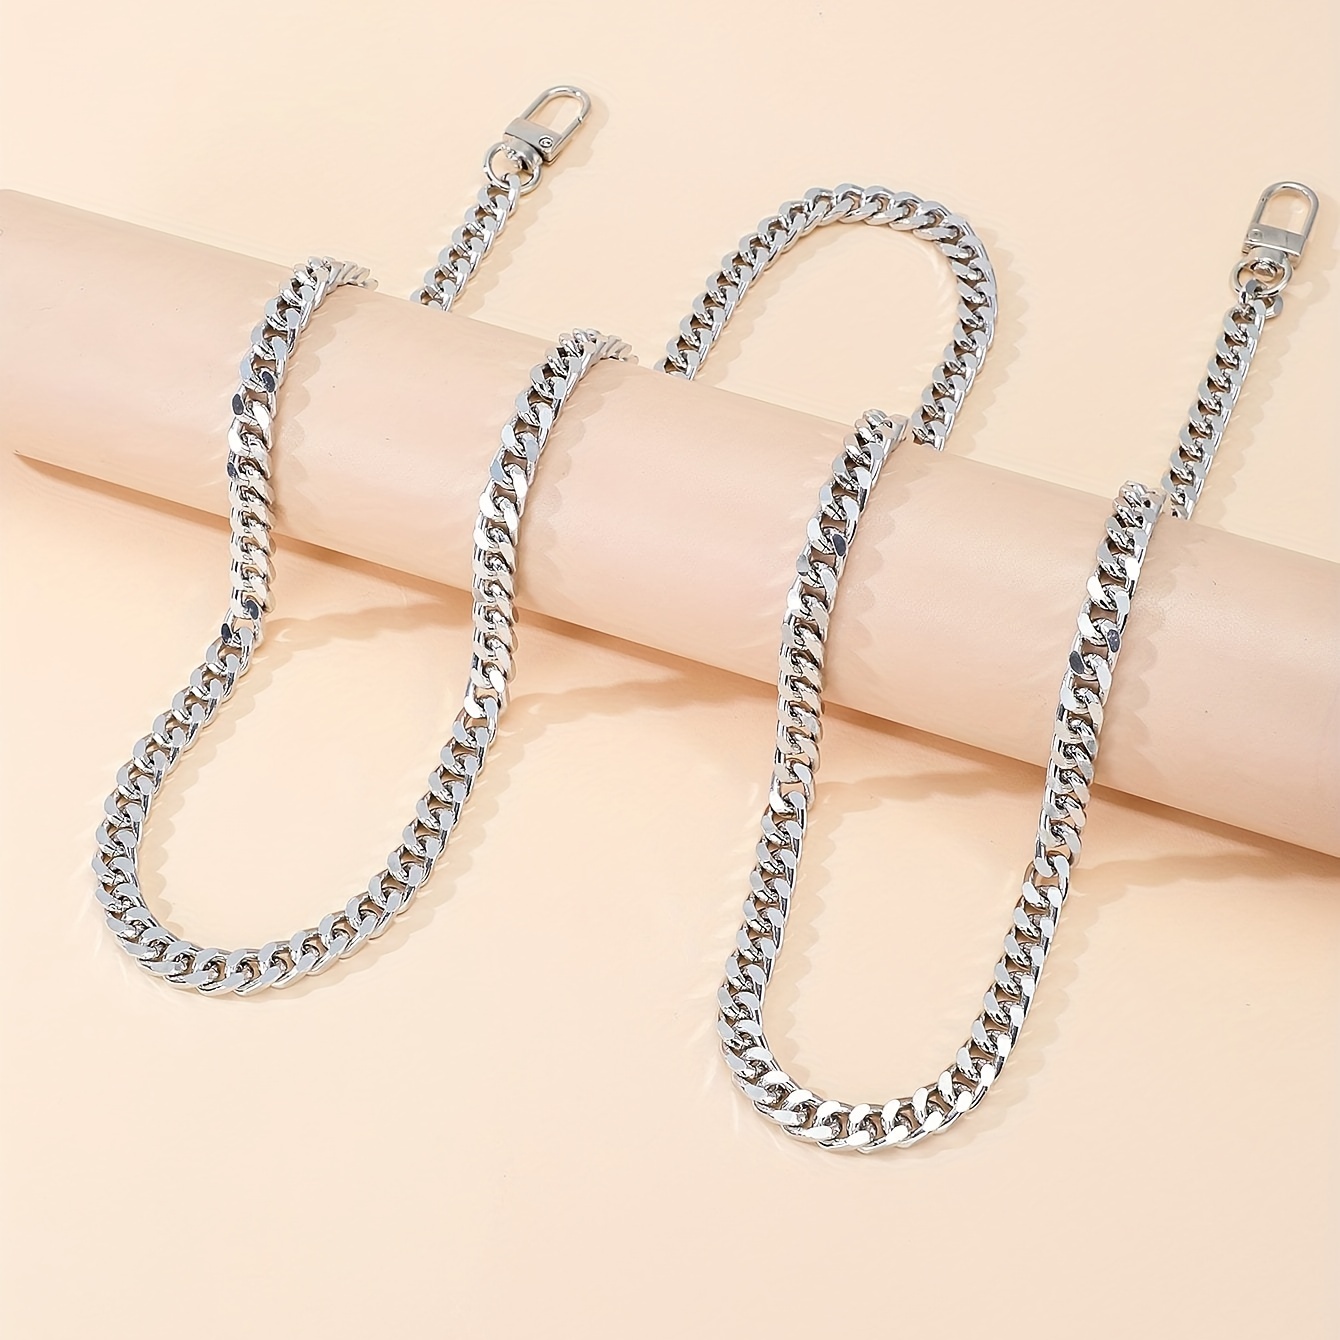 Simple Style Stainless Steel Silvery Bag Chain Holiday Gift Purse